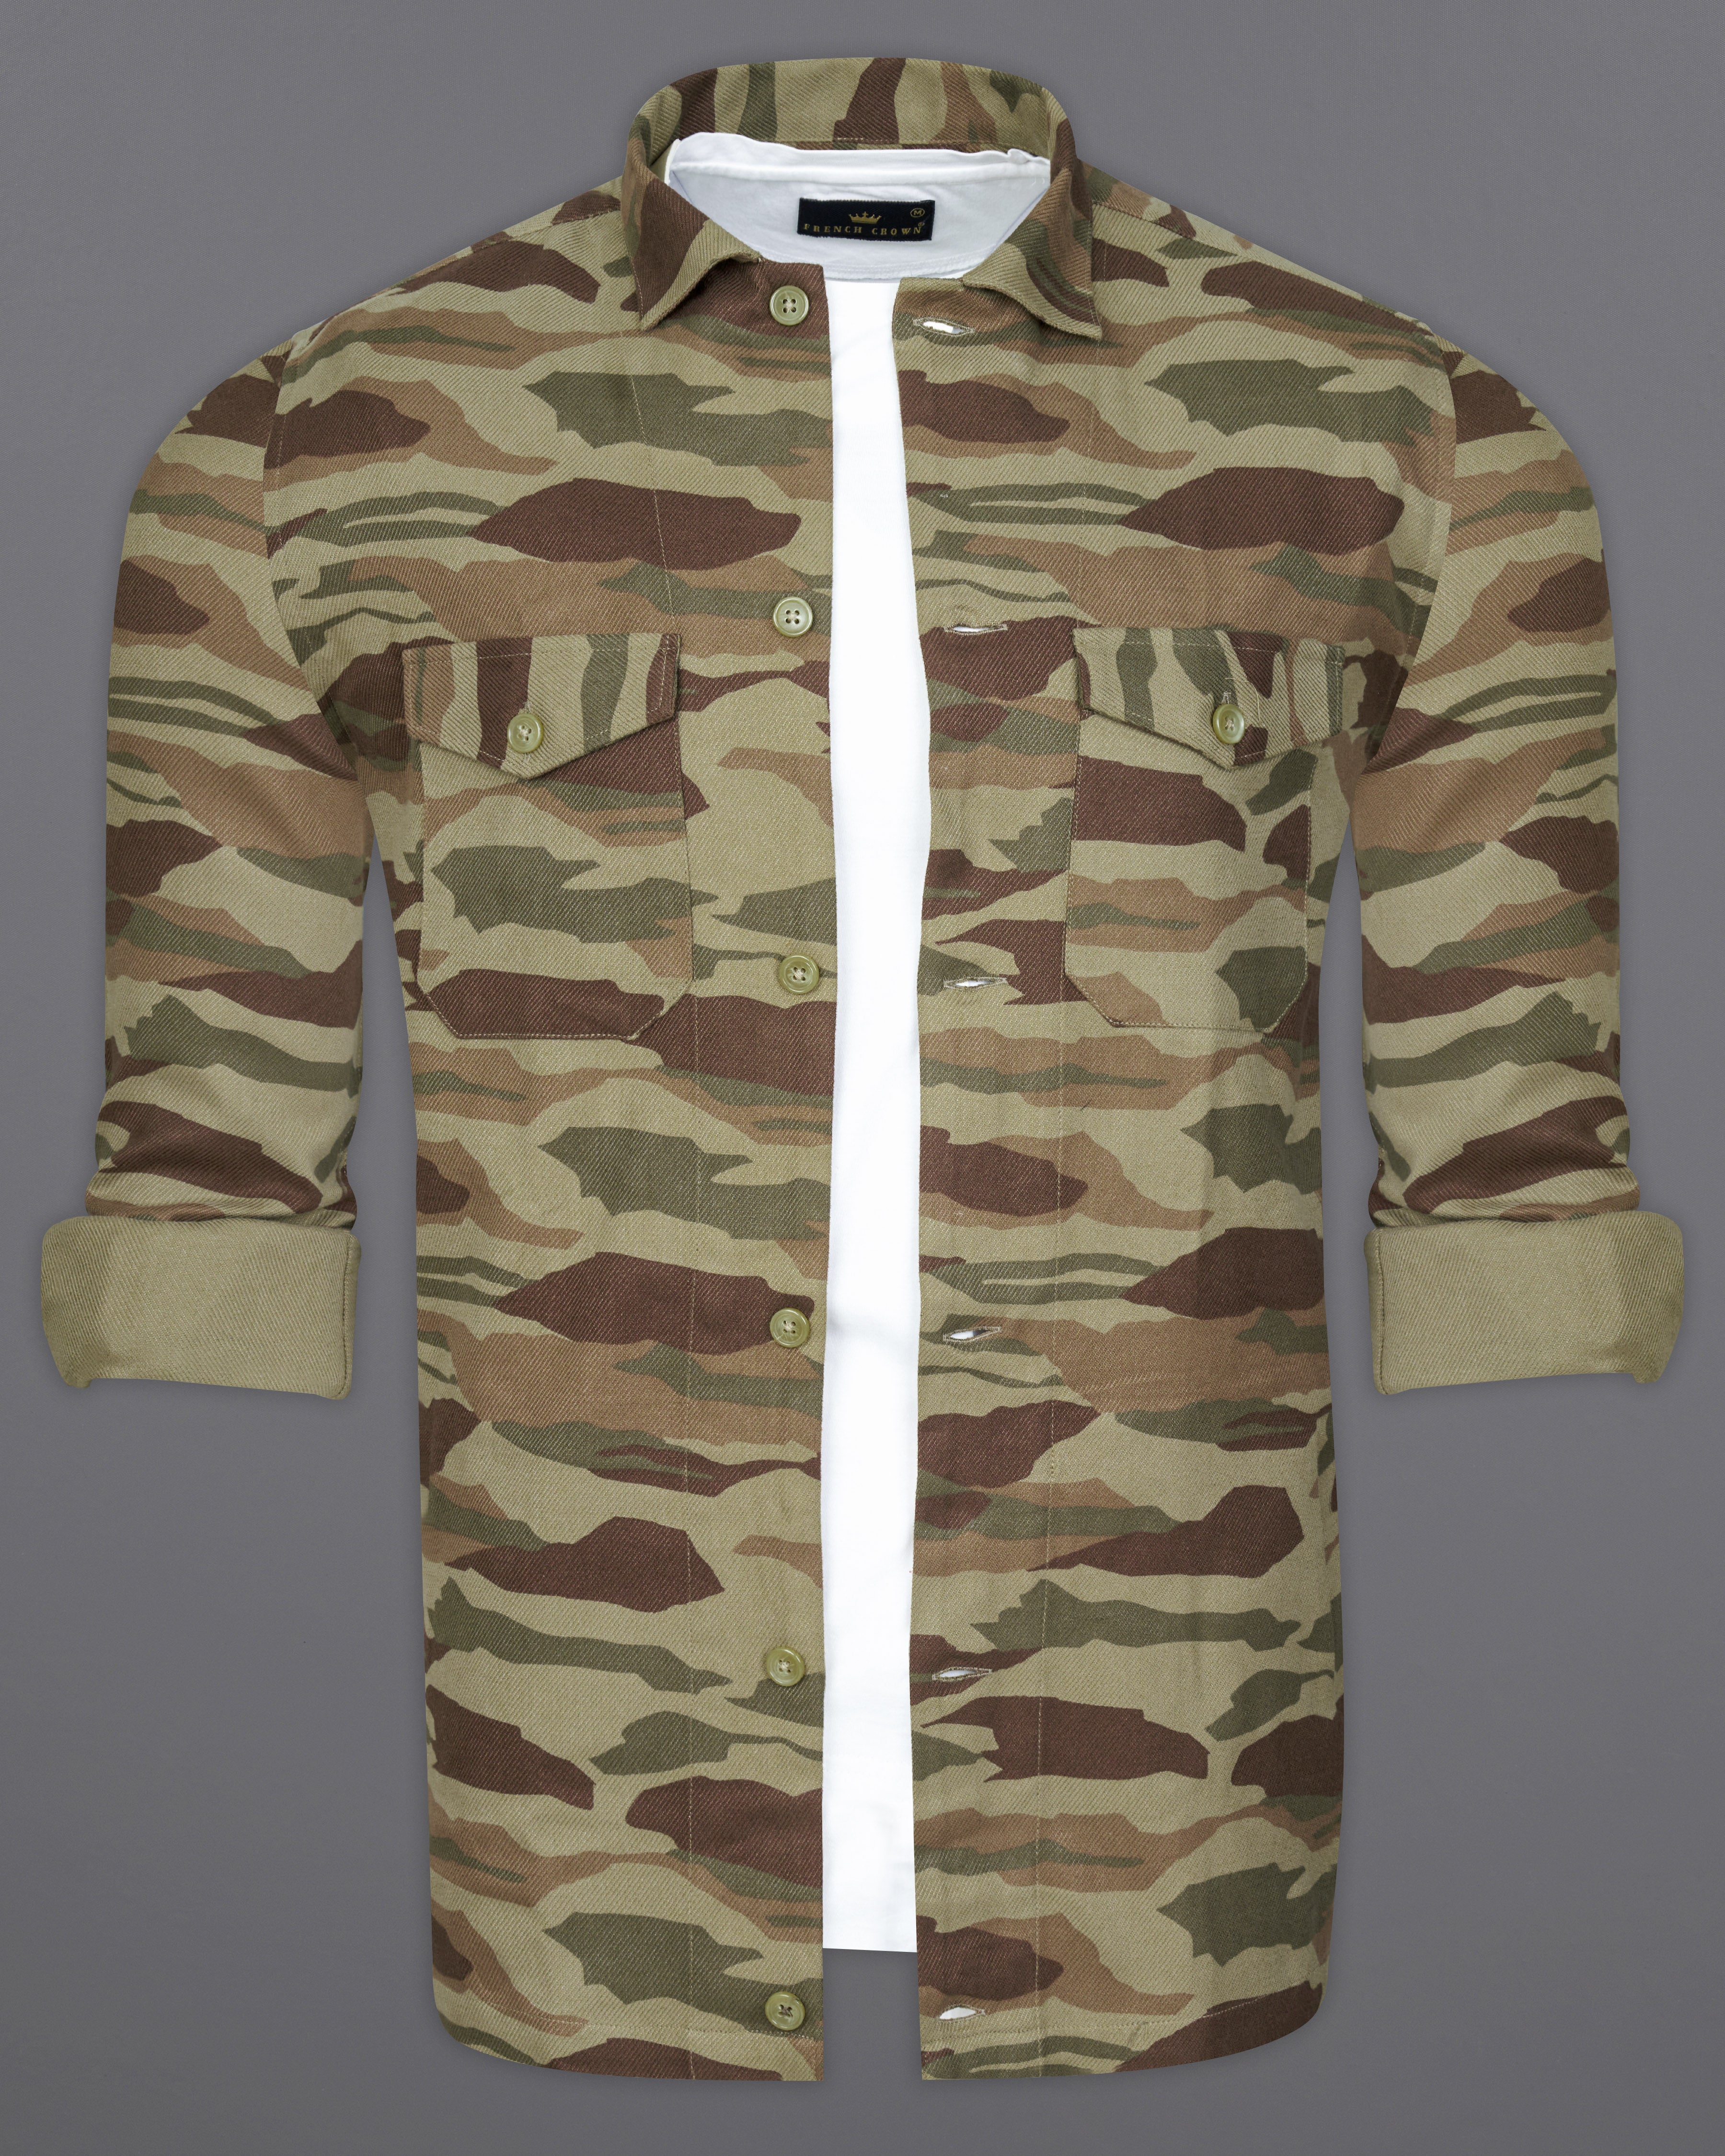 Sandrift Green with Taupe Brown Camouflage Royal Oxford Designer Shirt 9509-CA-FP-OS-P285-38, 9509-CA-FP-OS-P285-H-38, 9509-CA-FP-OS-P285-39, 9509-CA-FP-OS-P285-H-39, 9509-CA-FP-OS-P285-40, 9509-CA-FP-OS-P285-H-40, 9509-CA-FP-OS-P285-42, 9509-CA-FP-OS-P285-H-42, 9509-CA-FP-OS-P285-44, 9509-CA-FP-OS-P285-H-44, 9509-CA-FP-OS-P285-46, 9509-CA-FP-OS-P285-H-46, 9509-CA-FP-OS-P285-48, 9509-CA-FP-OS-P285-H-48, 9509-CA-FP-OS-P285-50, 9509-CA-FP-OS-P285-H-50, 9509-CA-FP-OS-P285-52, 9509-CA-FP-OS-P285-H-52